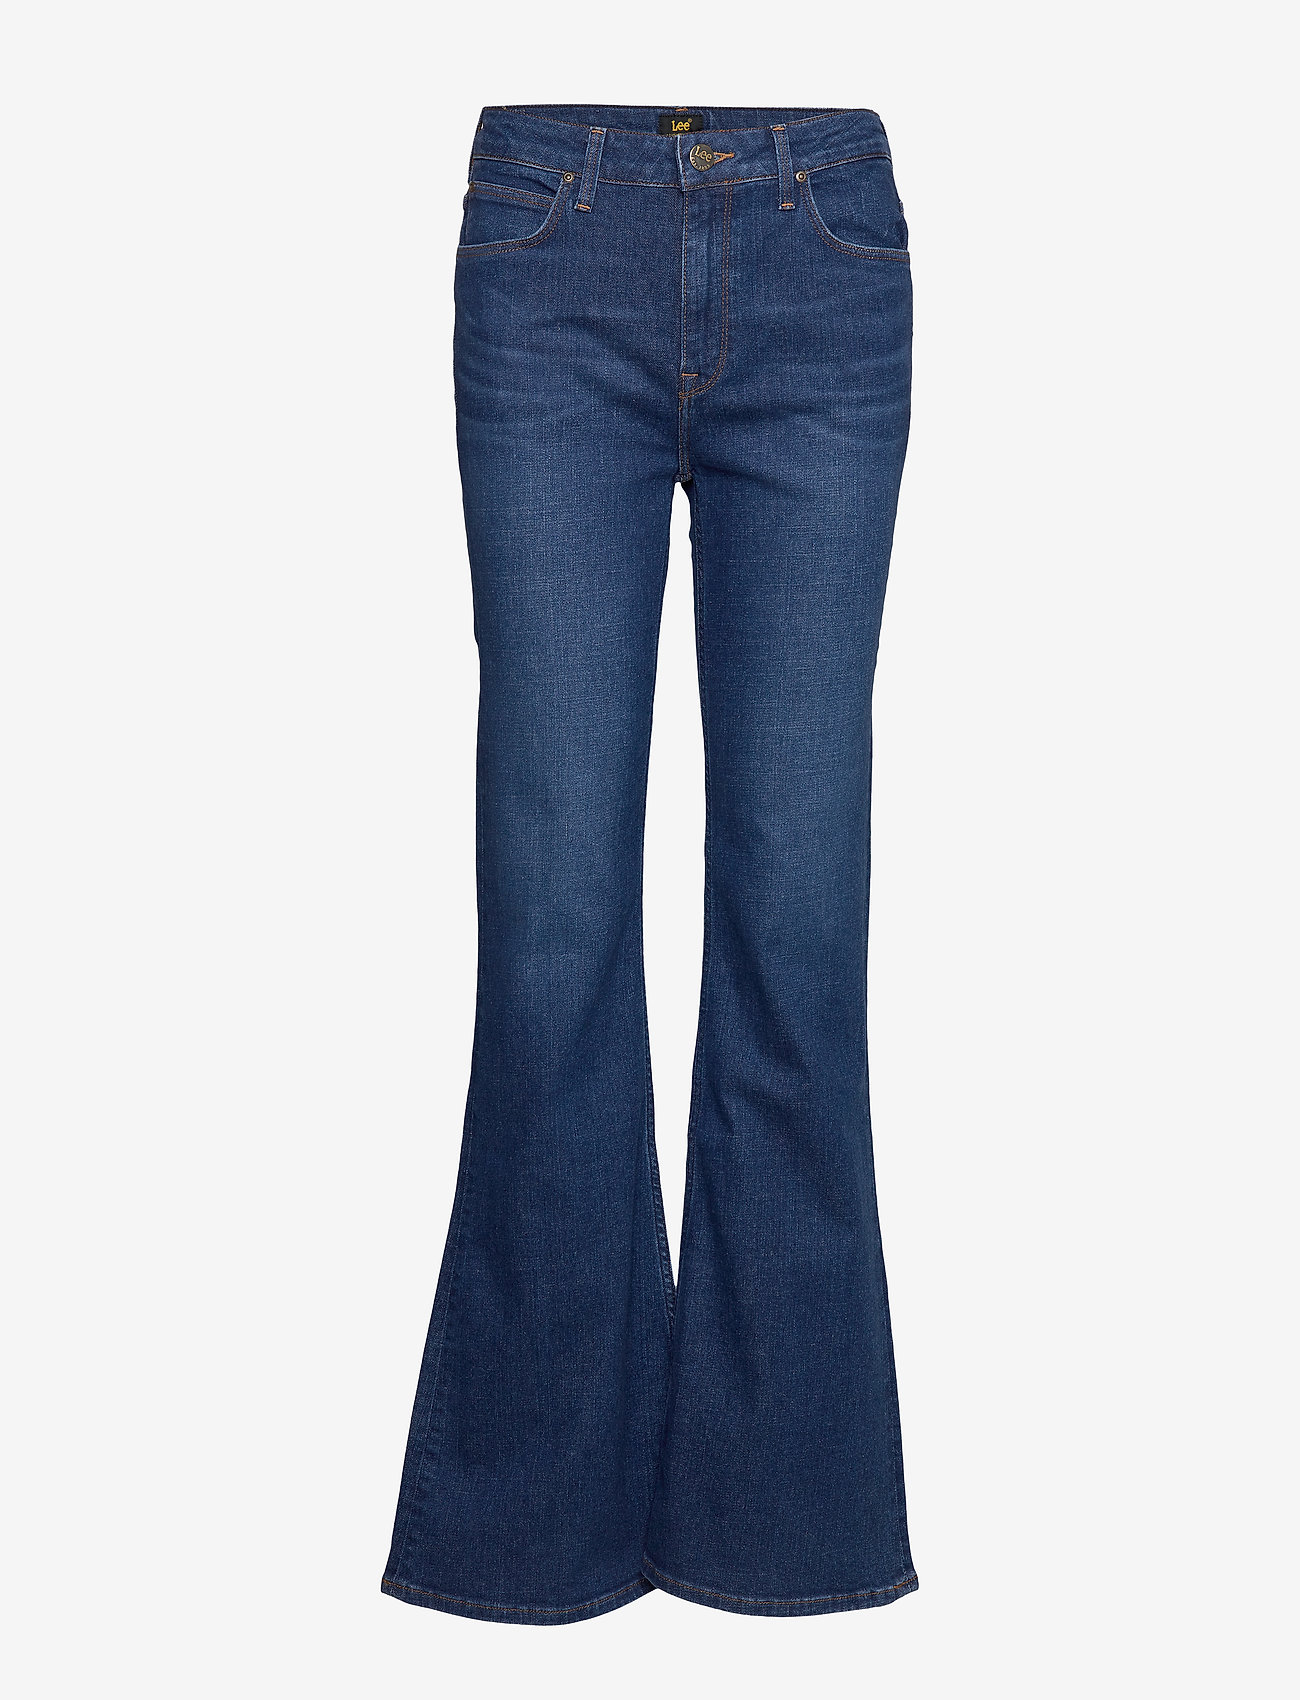 Lee Jeans - BREESE - flared jeans - dark favourite - 0